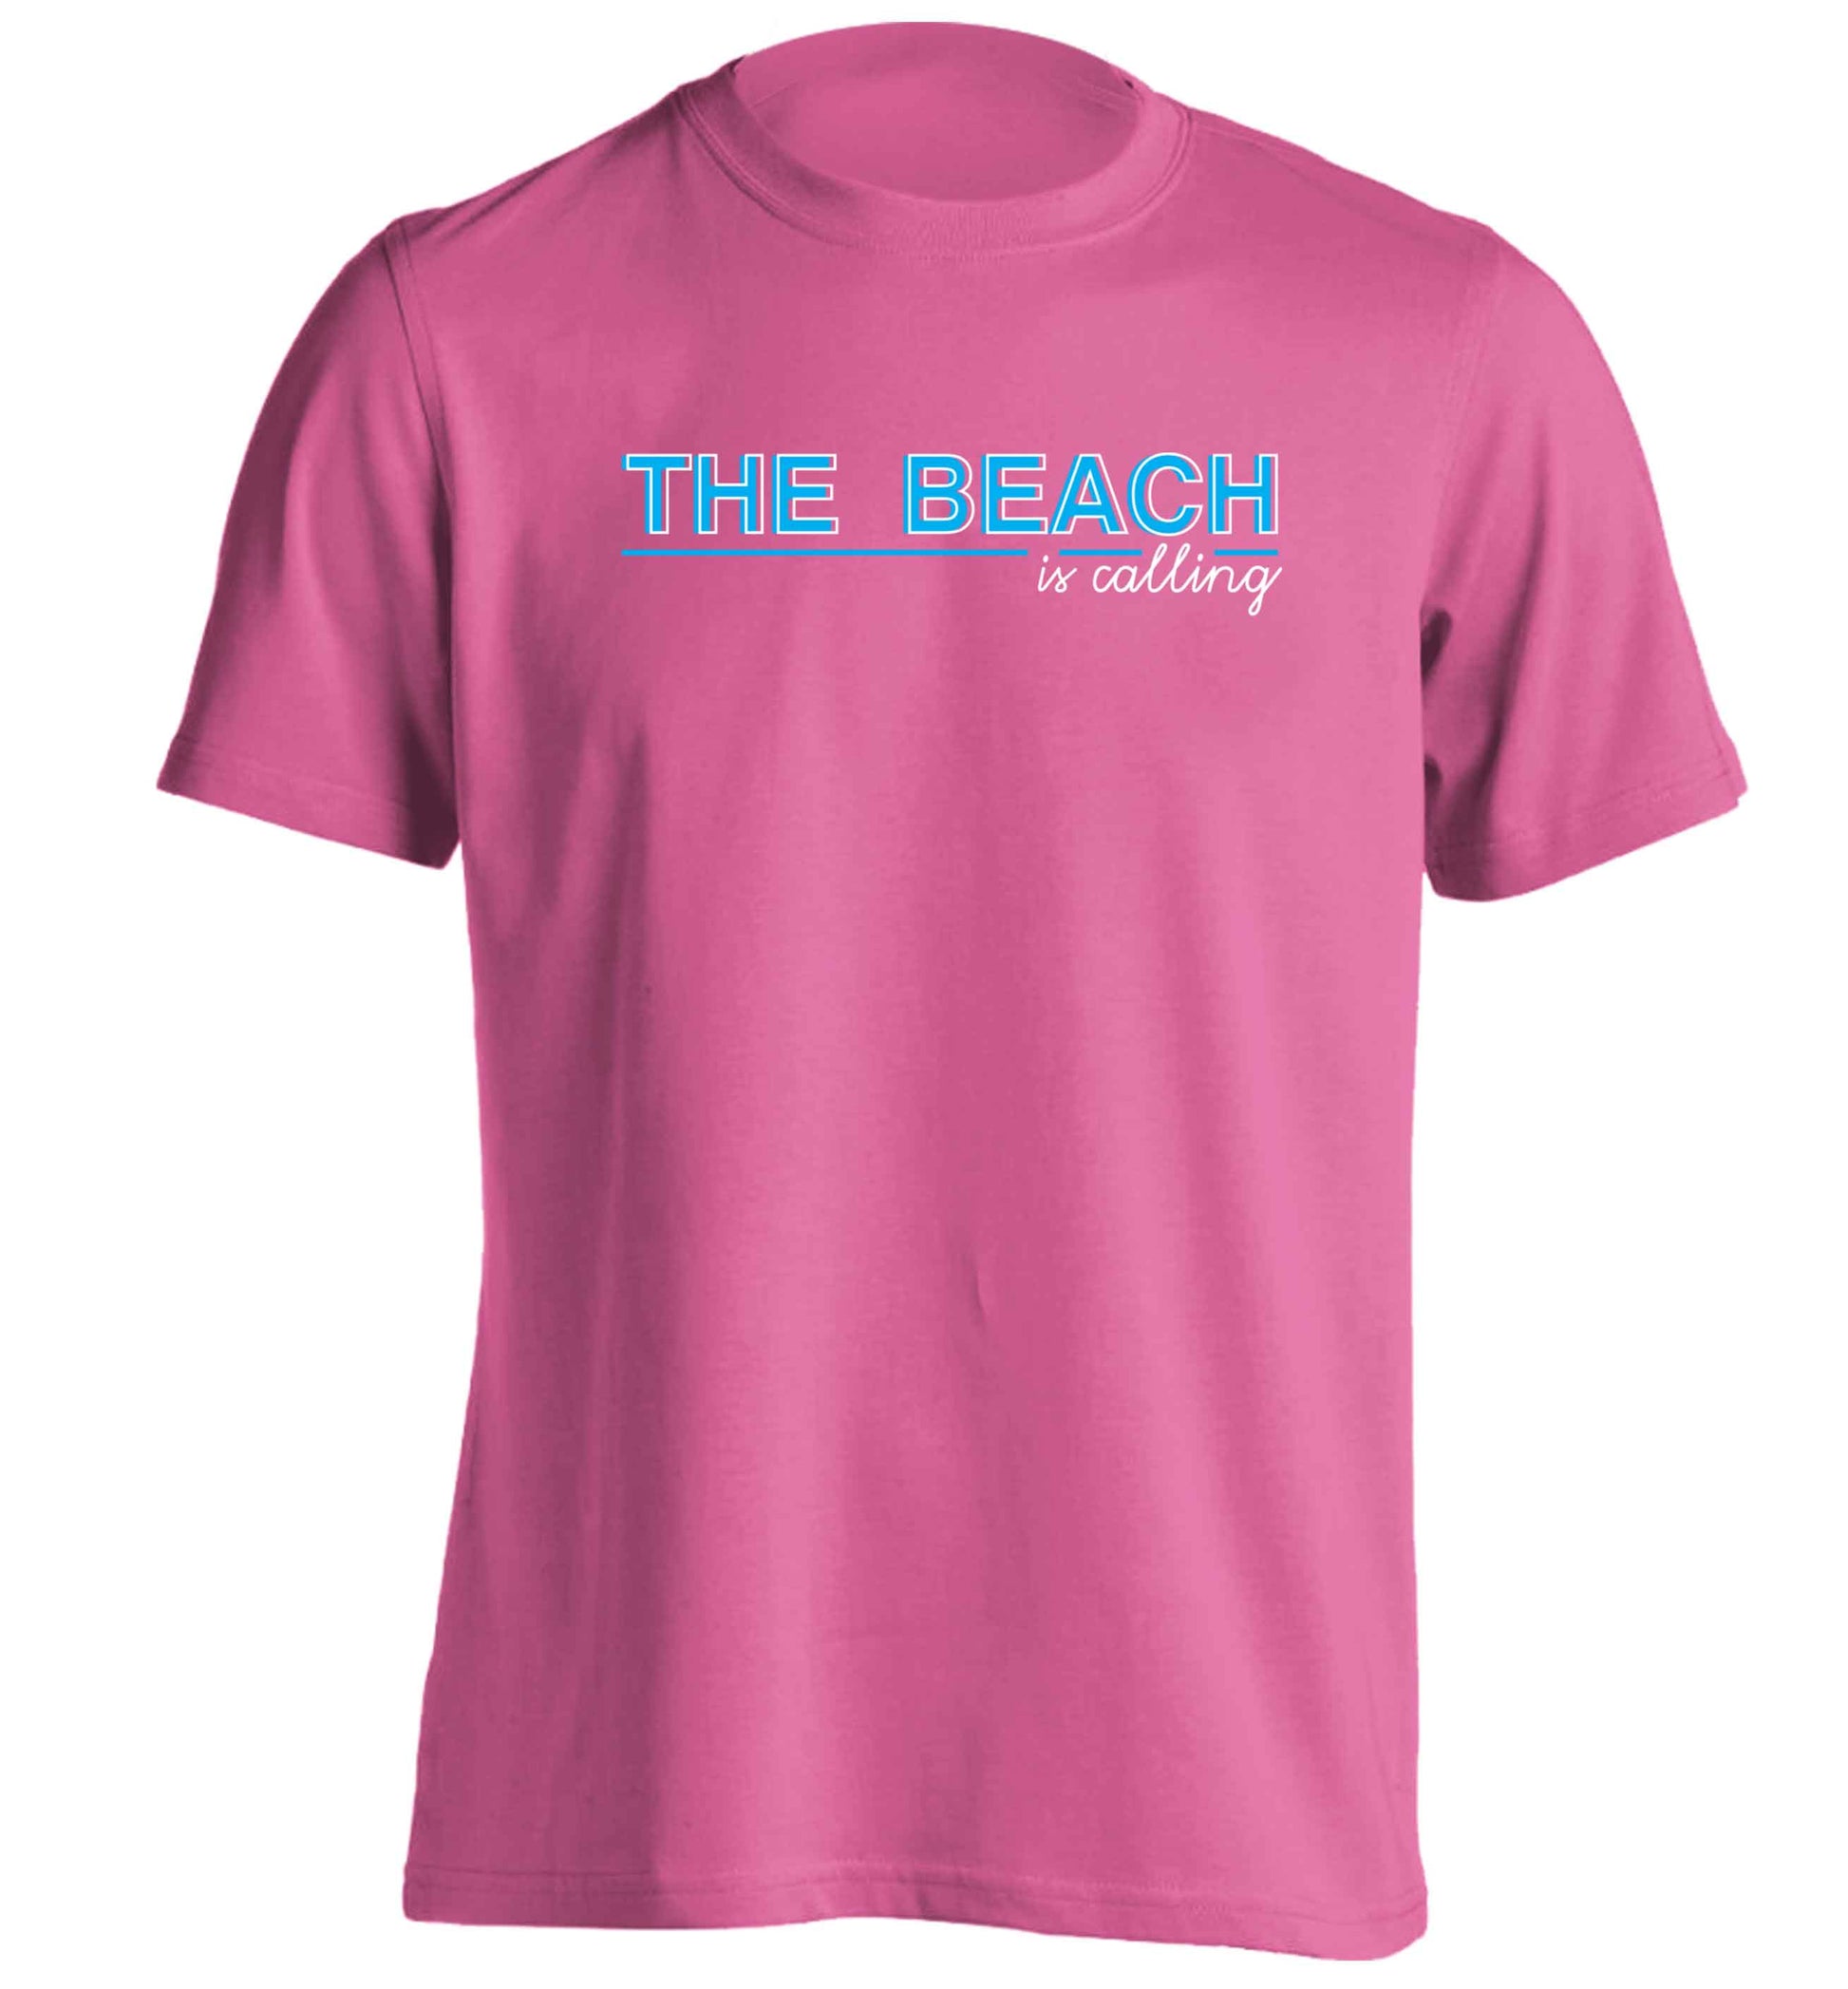 The beach is calling adults unisex pink Tshirt 2XL